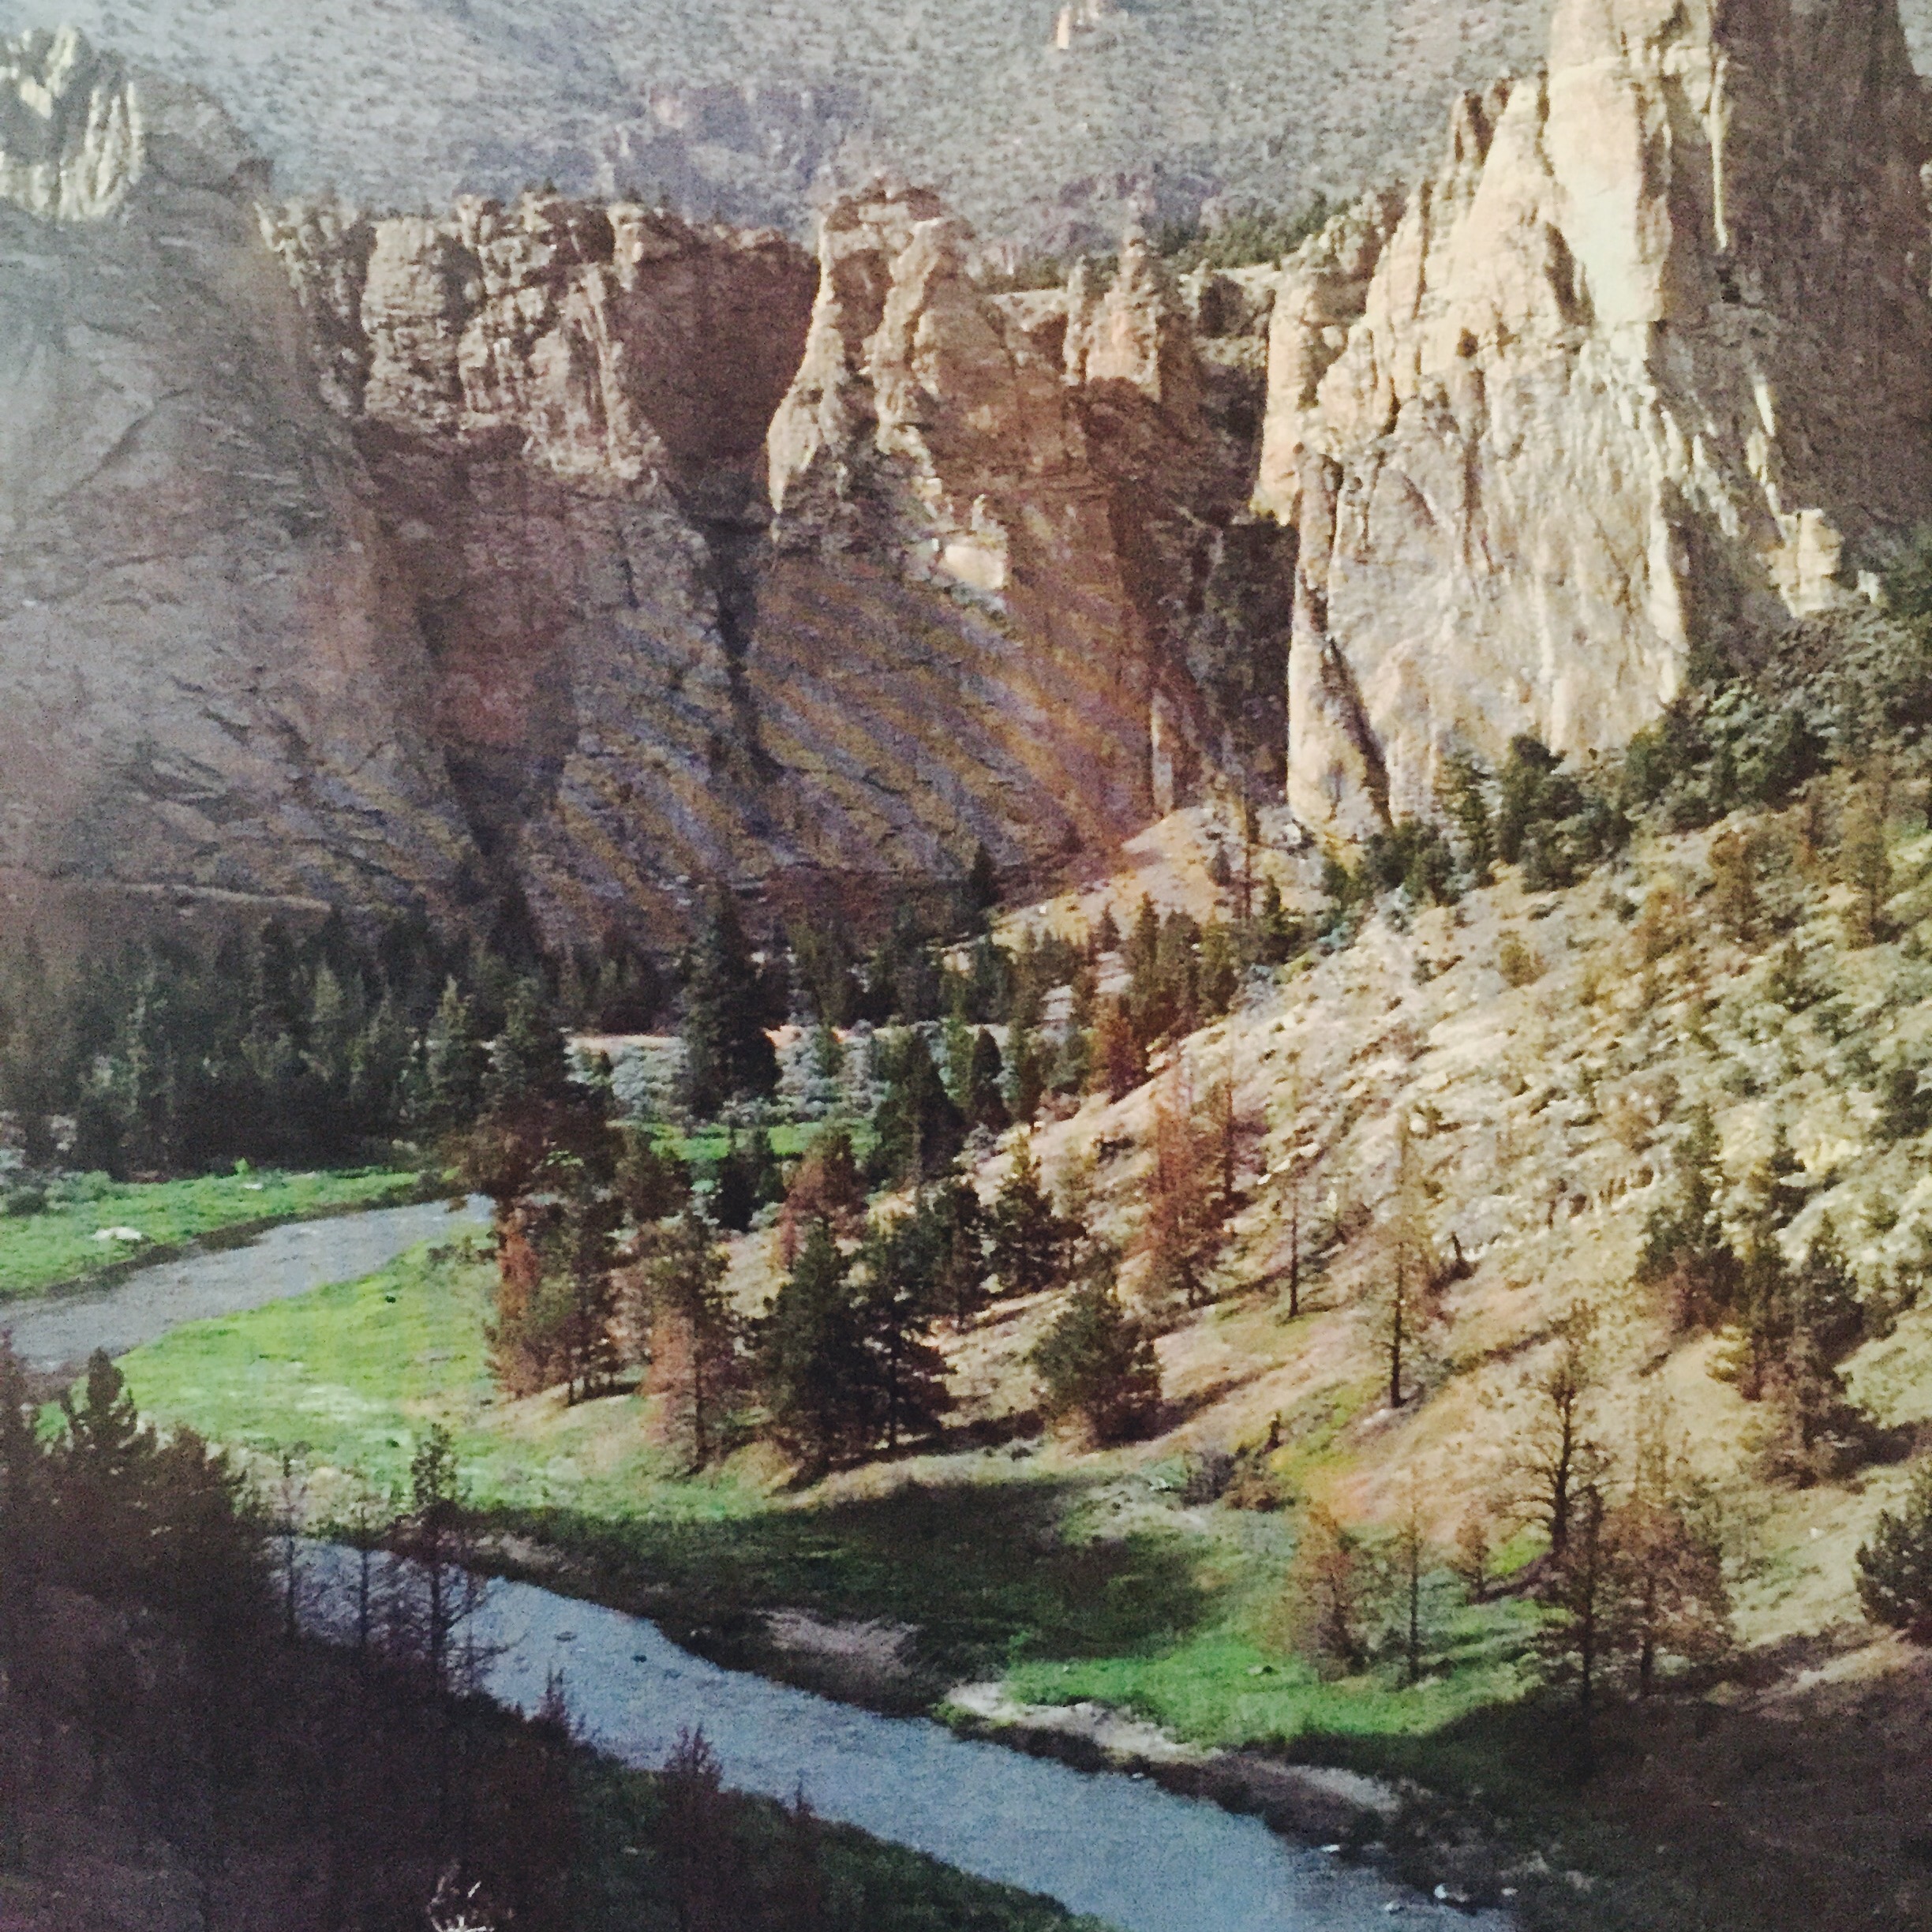 Smith Rock State Park: #ThrowbackThursday